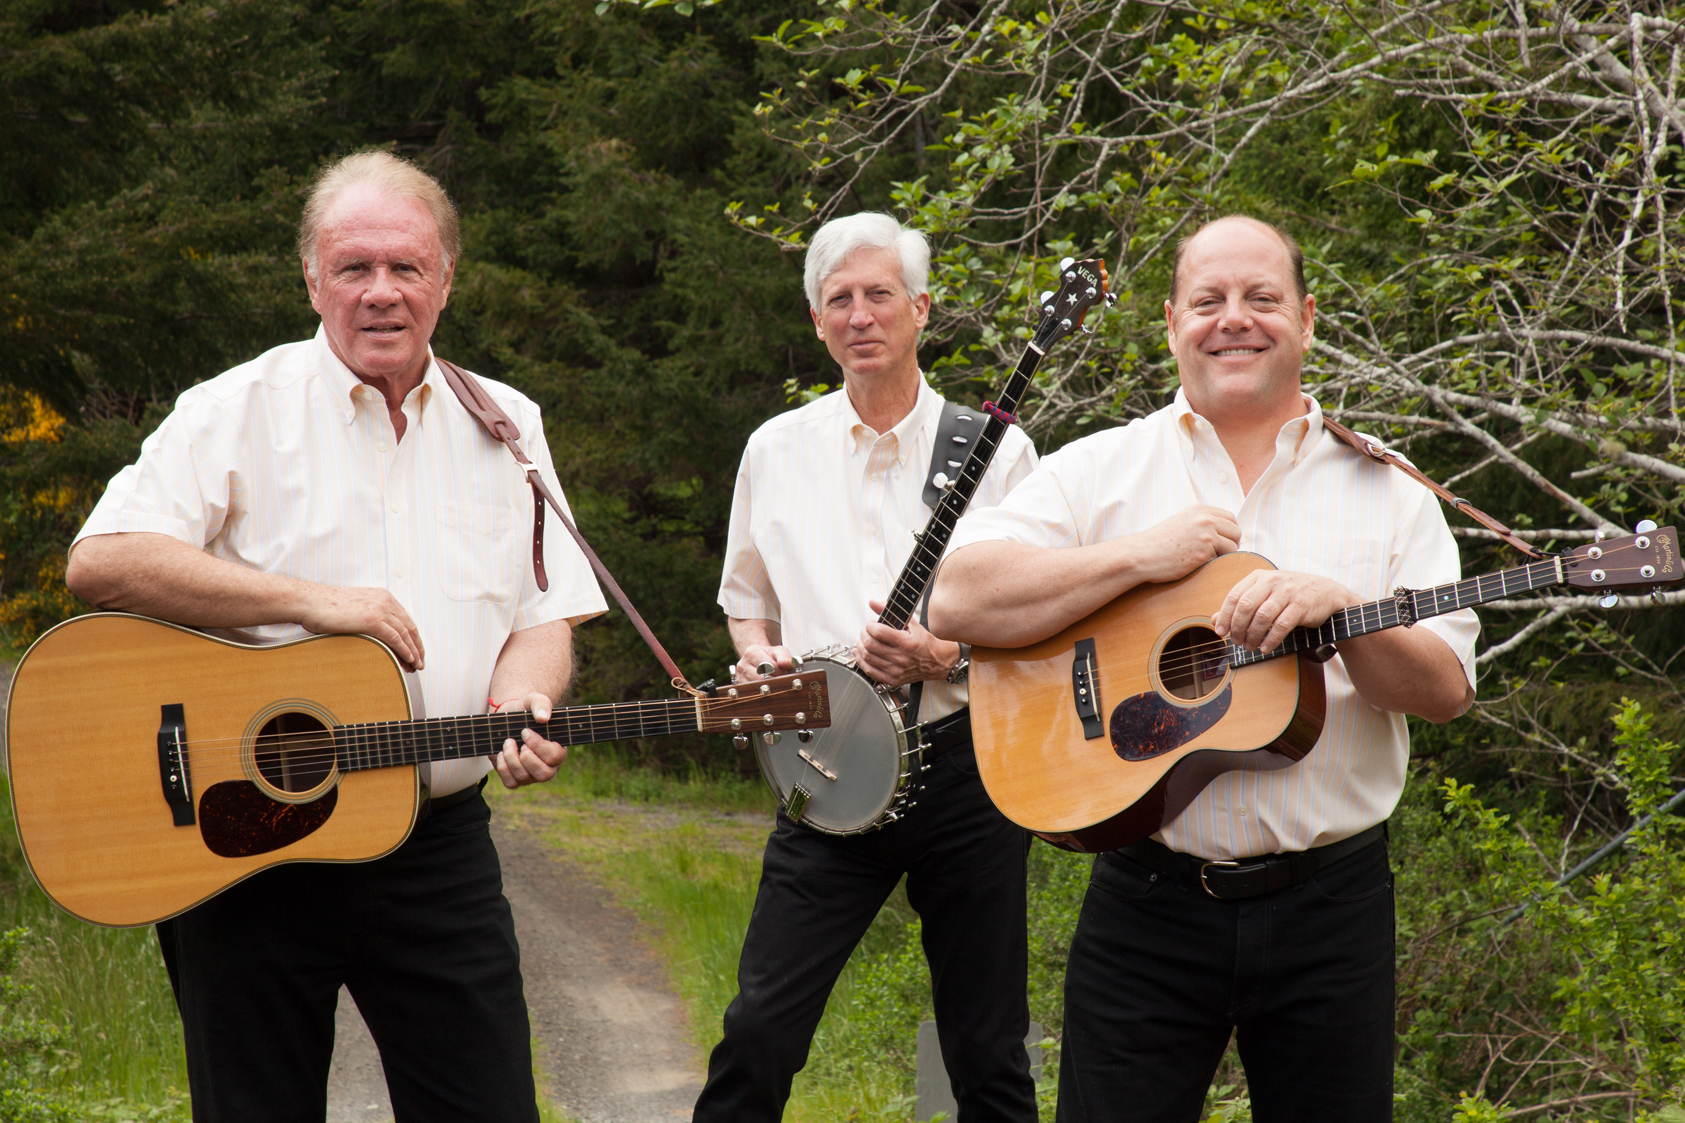 Legendary Folk Icons ‘The Kingston Trio’ Heads to Coral Springs